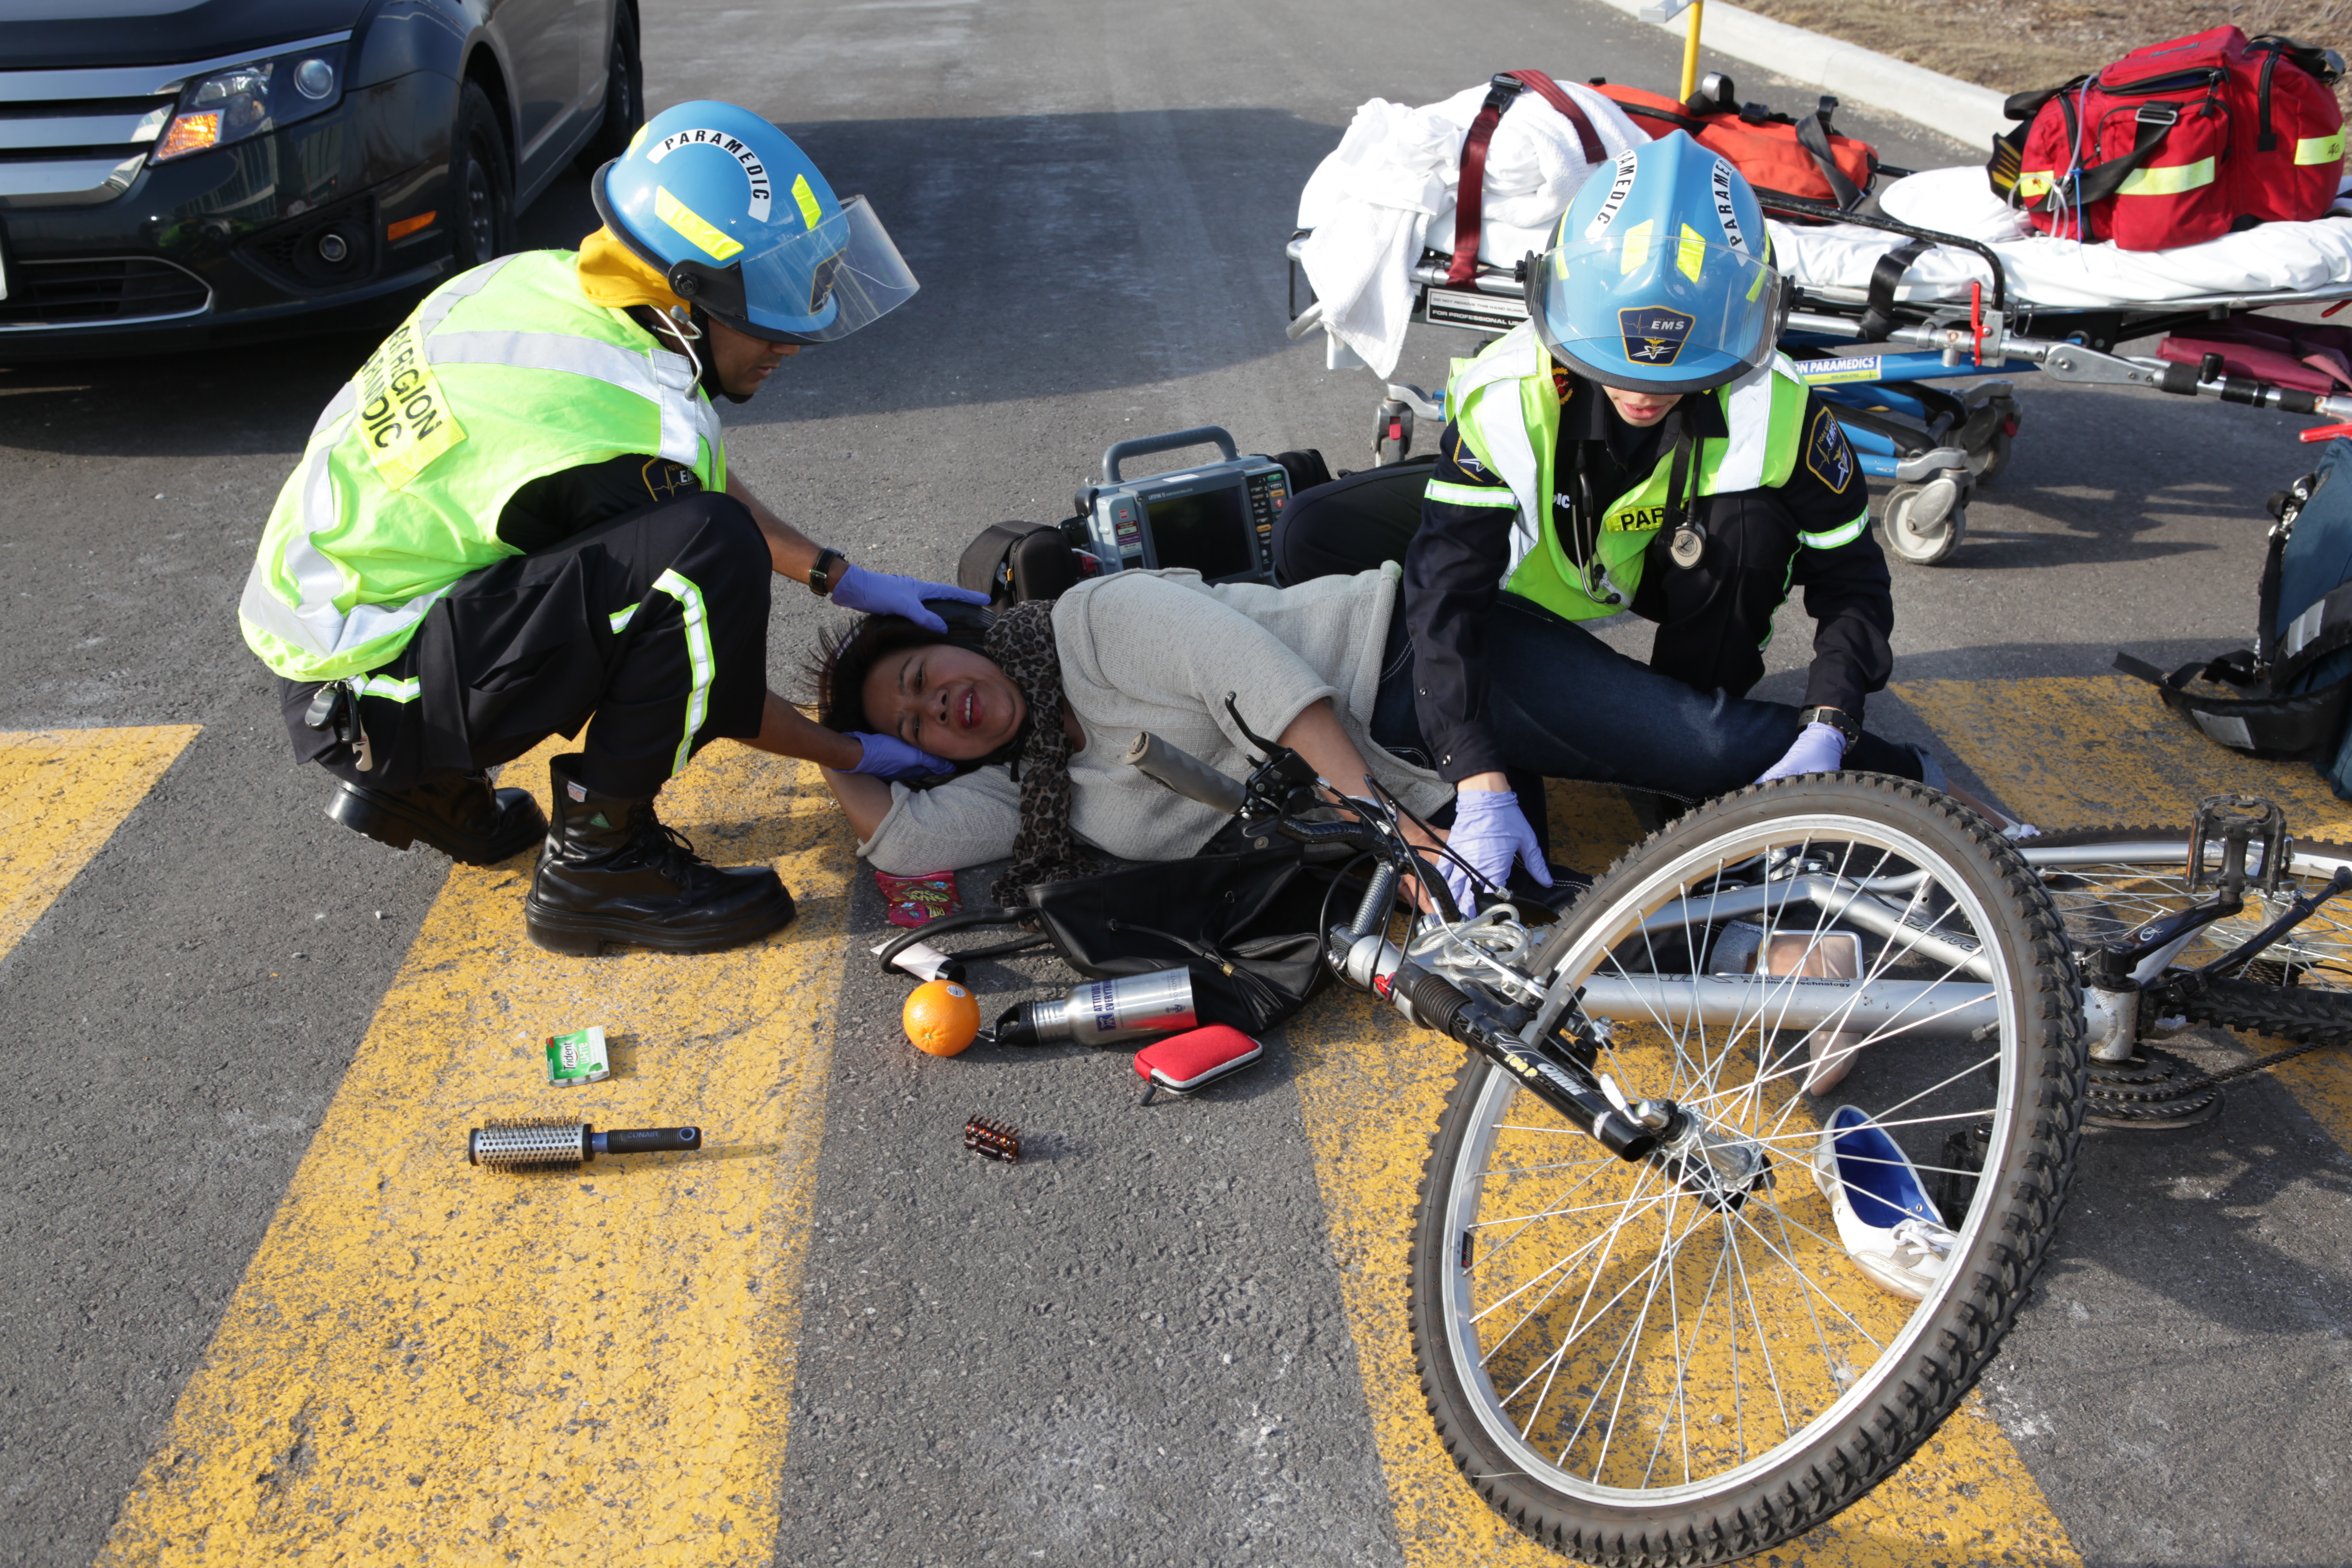 Two paramedics assisting a person with a bicycle who was presumably in a traffic accident